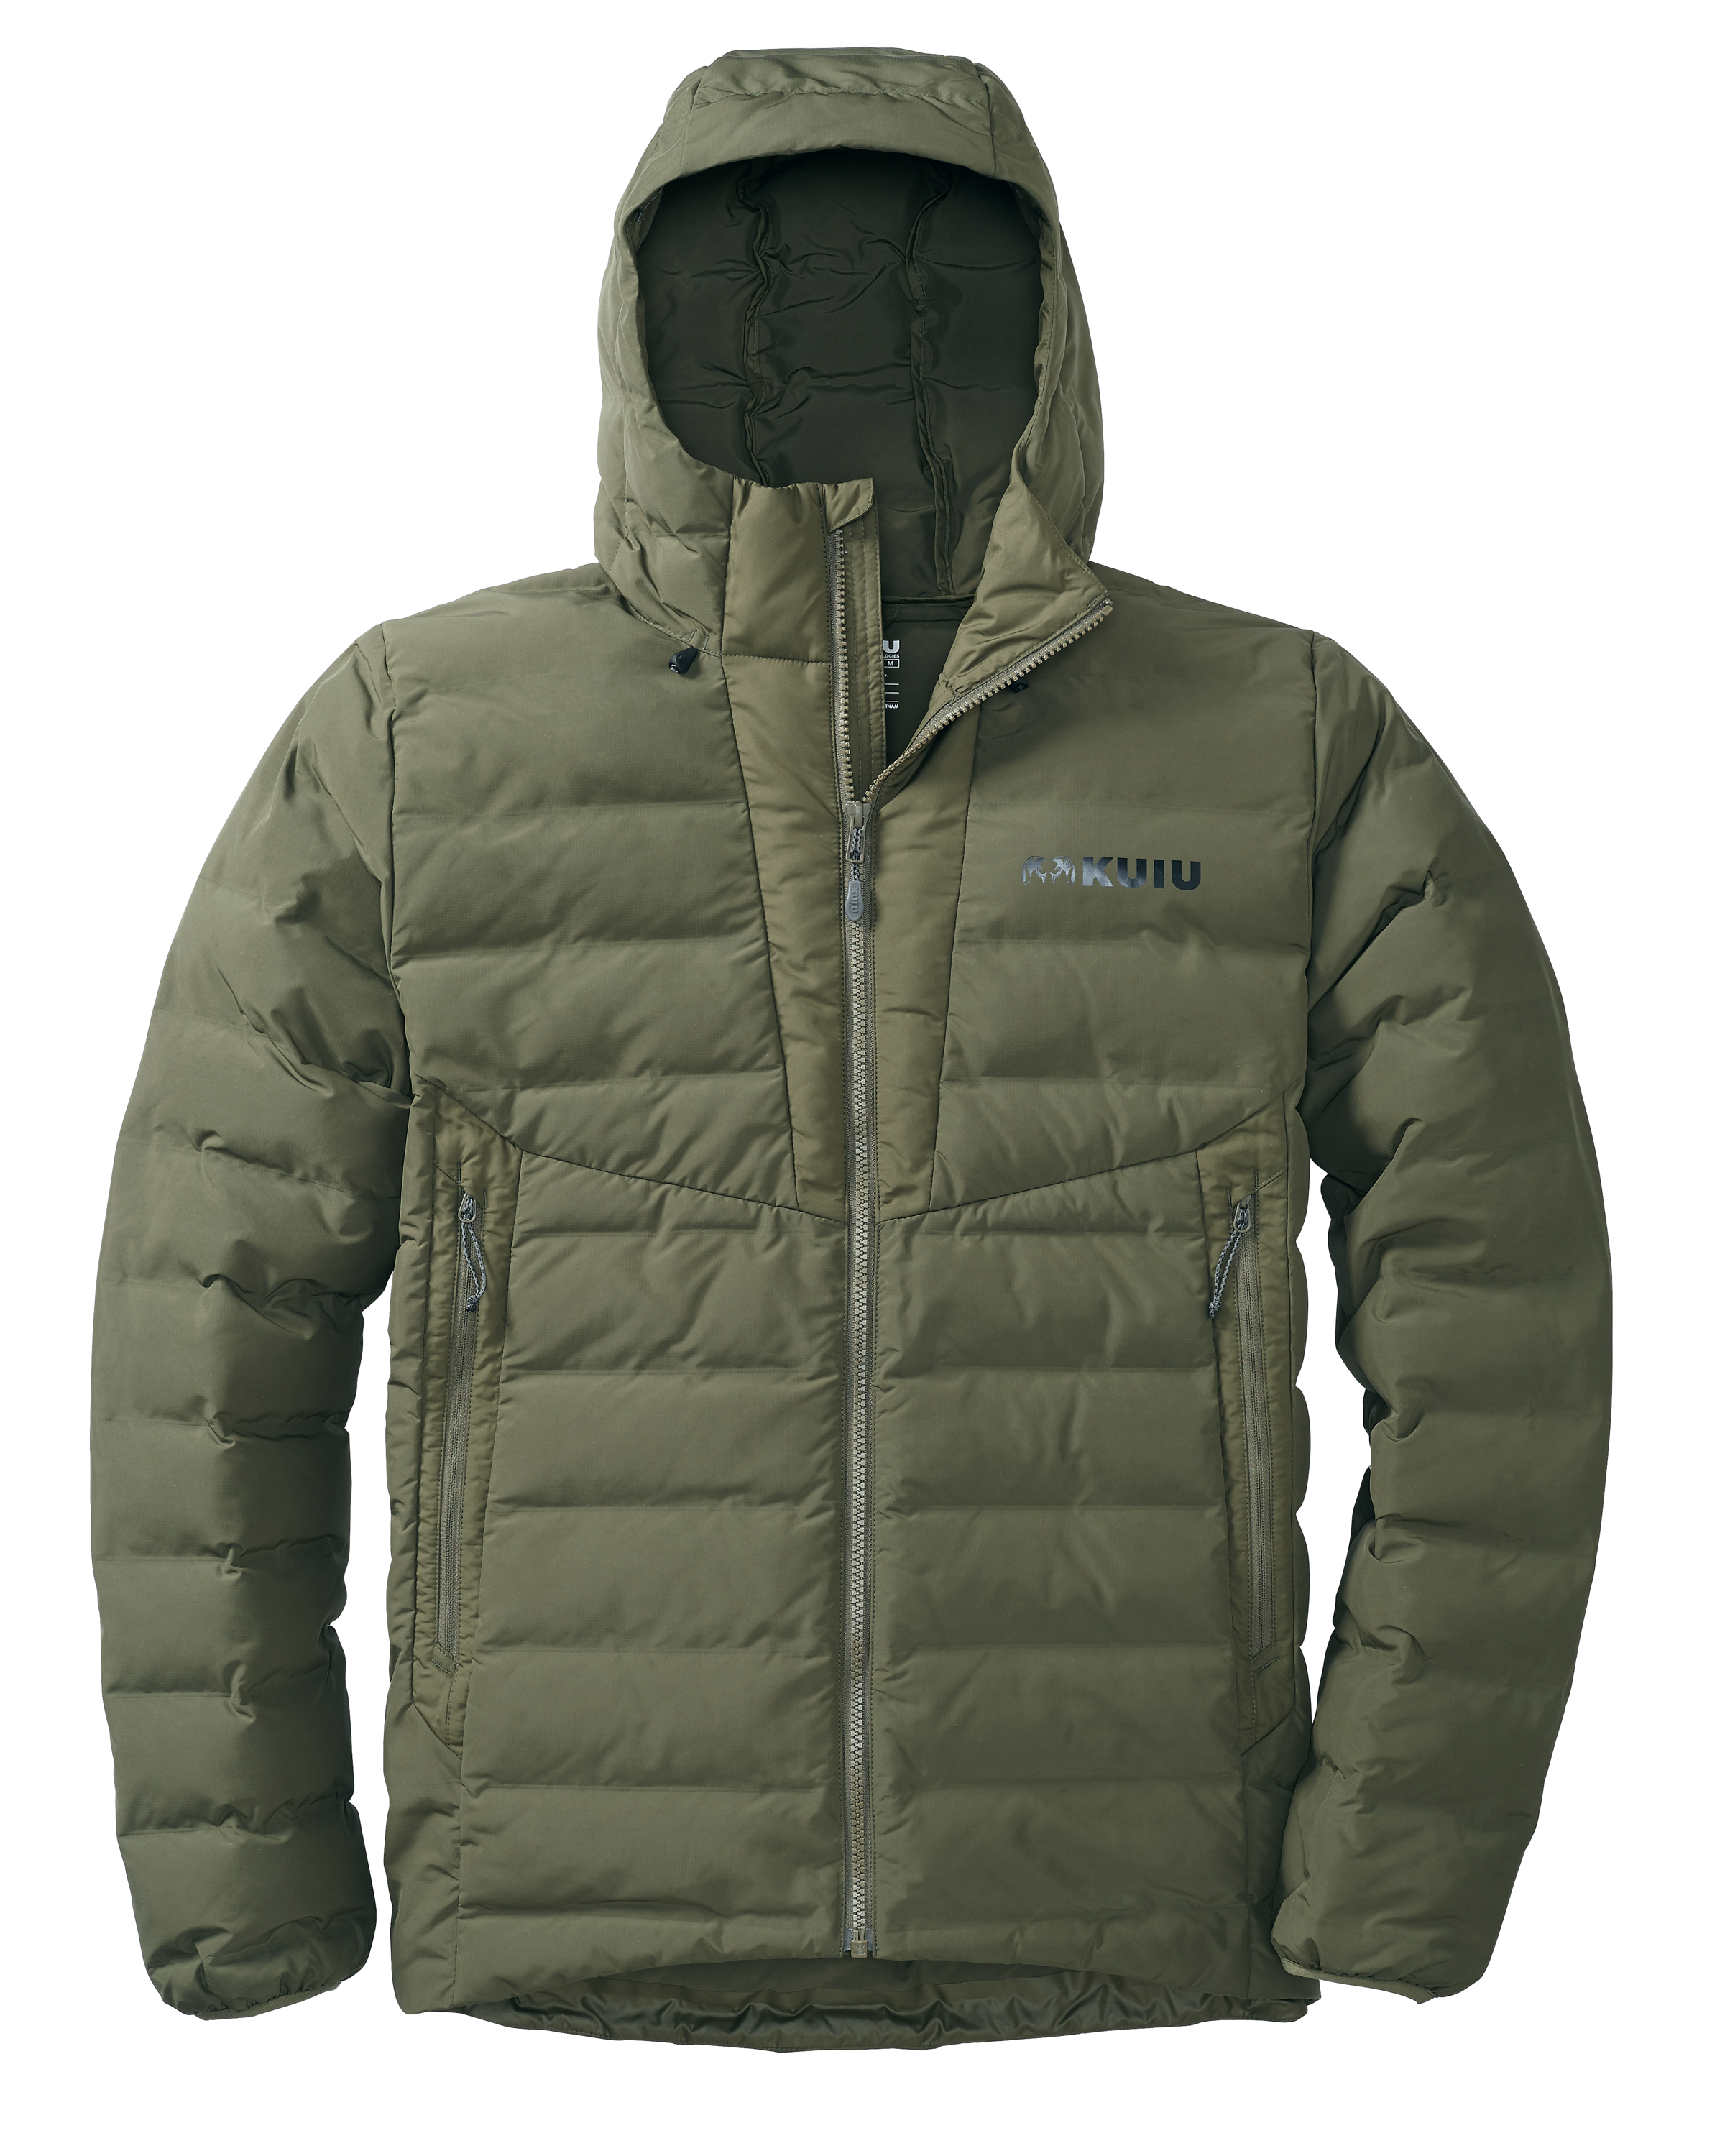 KUIU Elements Hooded Hunting Jacket in Olive | Size XL